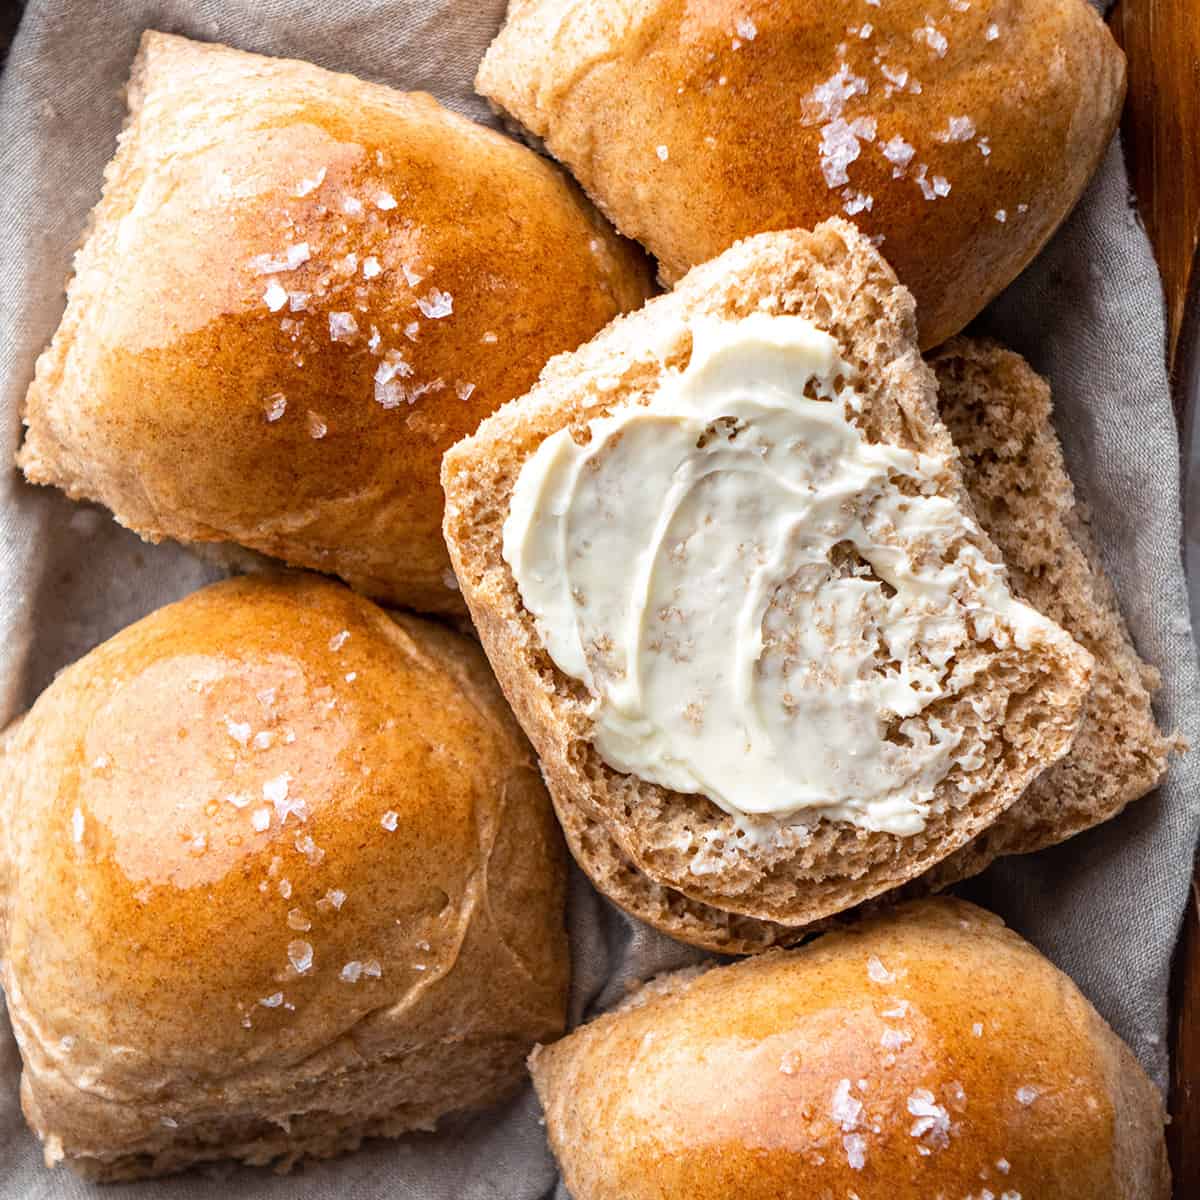 a Whole Wheat Roll cut in half with butter spread over it and four other rolls around it.